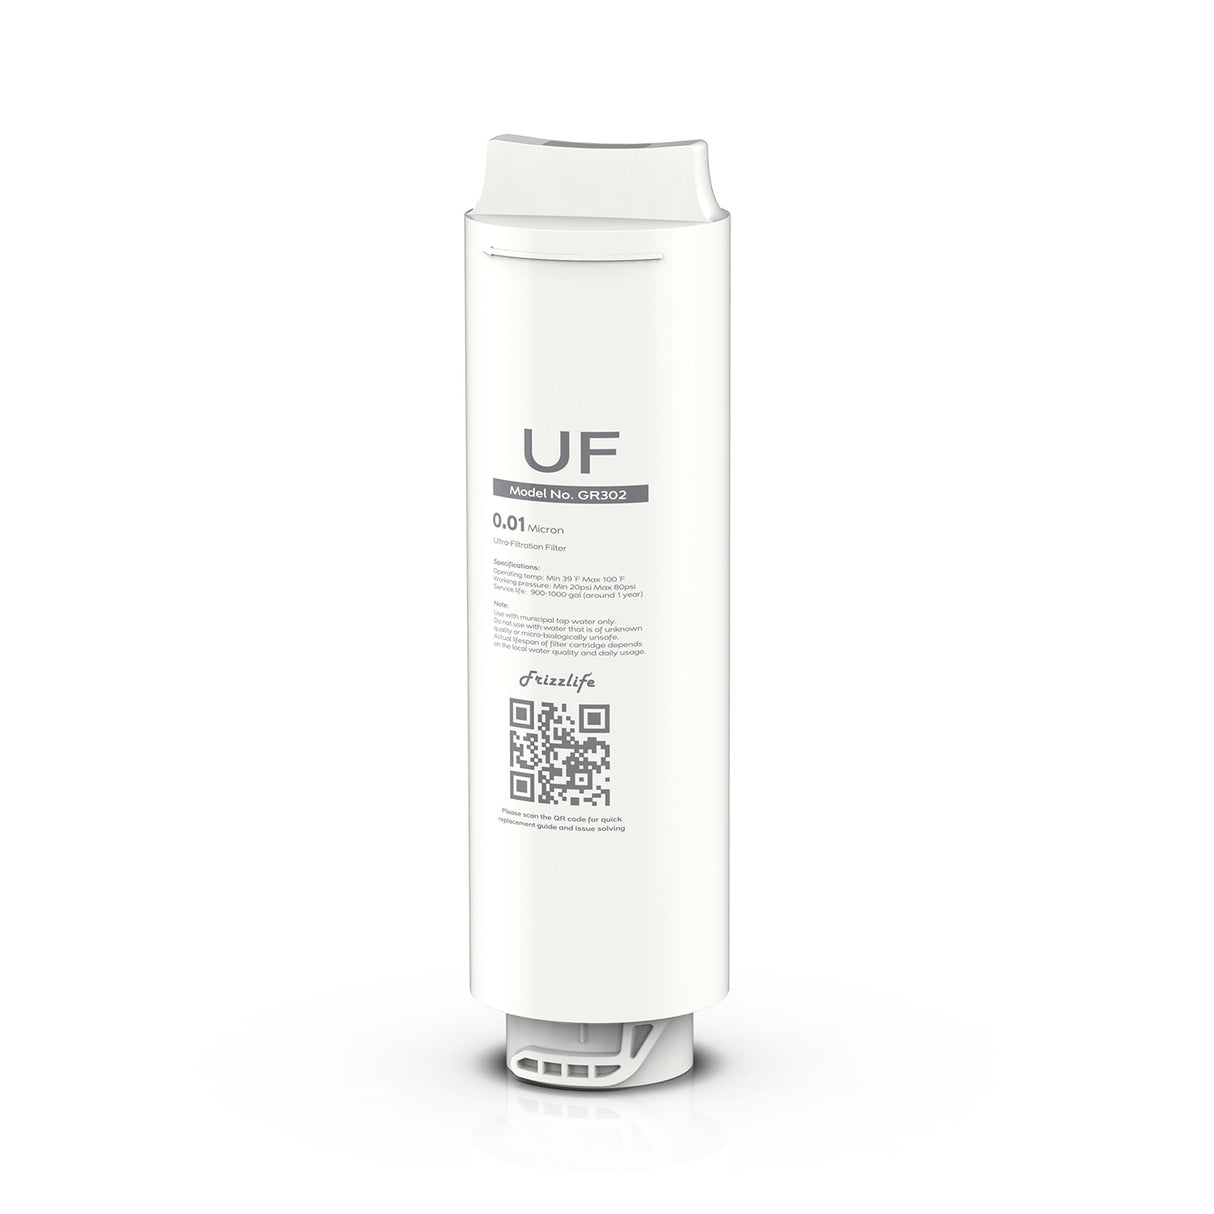 Frizzlife GR302 Replacement Filter Cartridge (UF) For GX99 Ultra-Filtration Water Filter